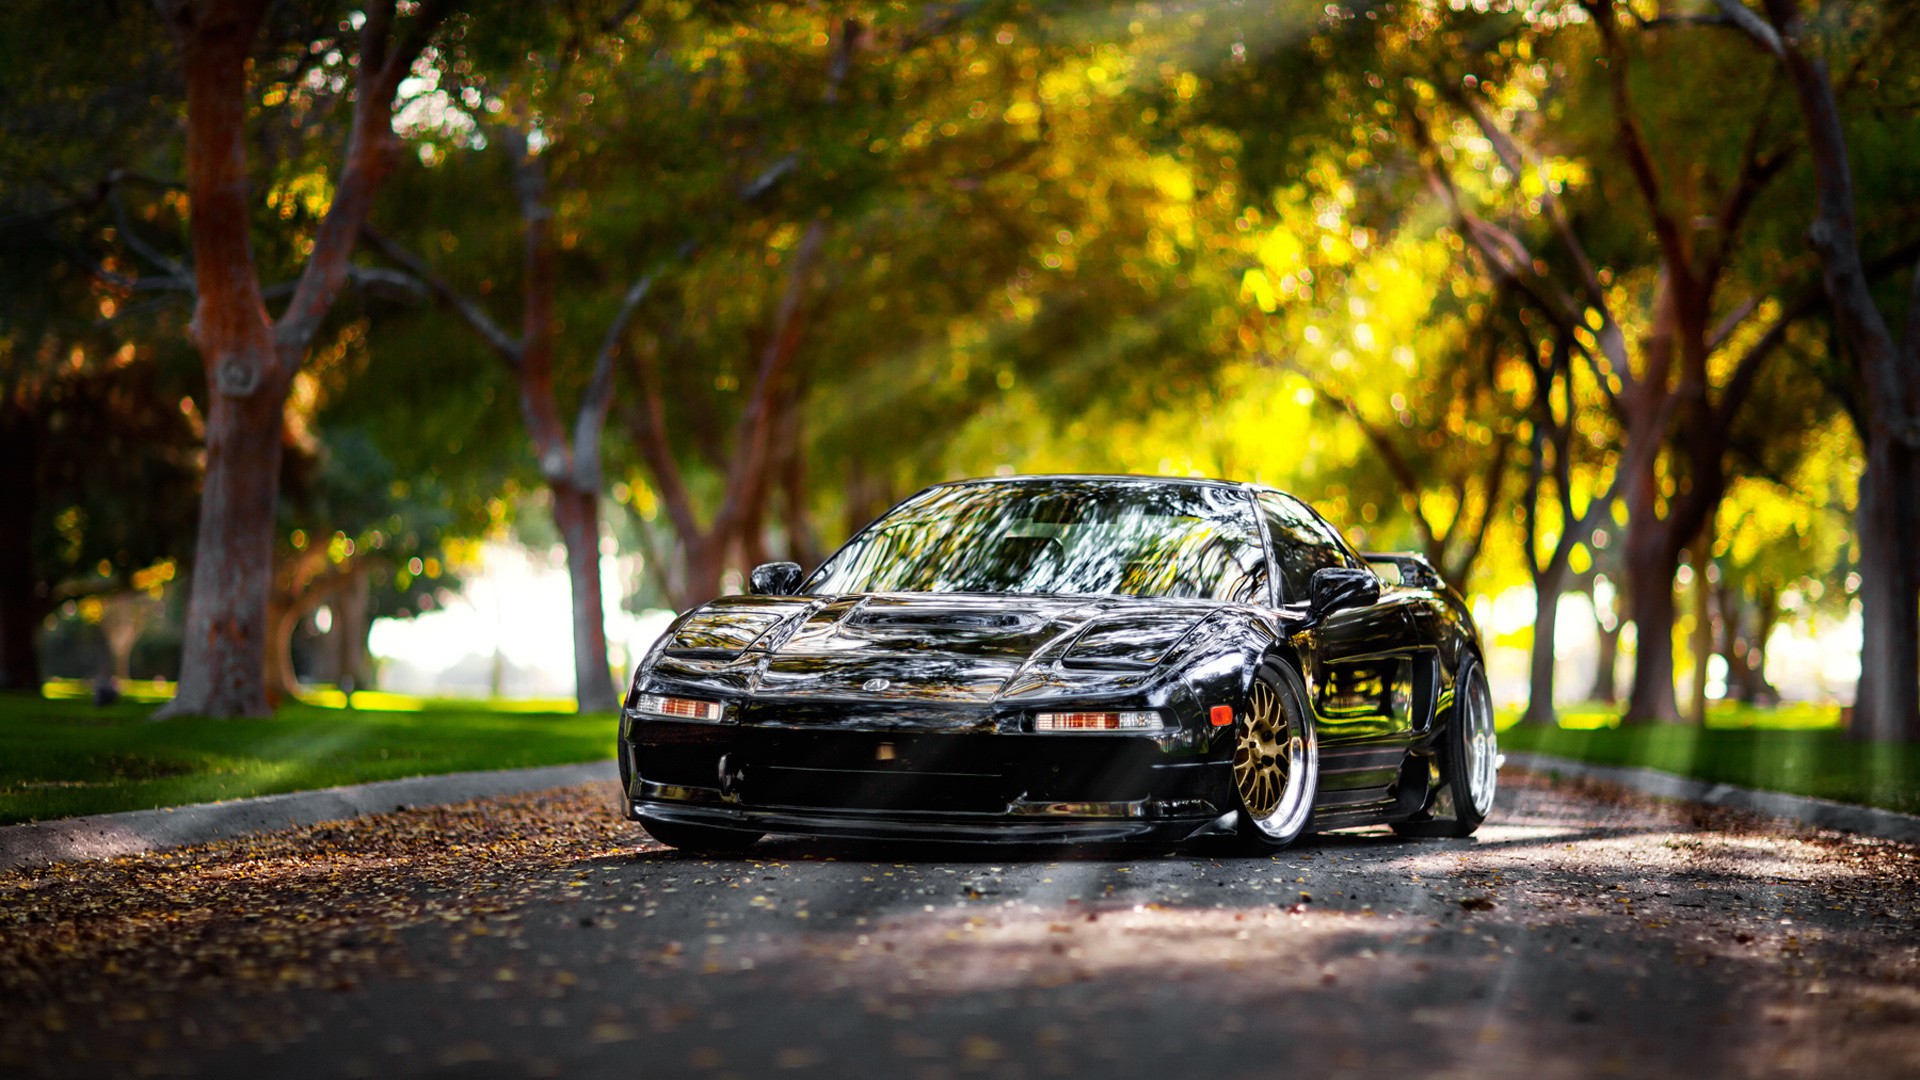 Jdm Cars Wallpaper 4K : 41 Jdm Hd Wallpapers Background Images Wallpaper Abyss